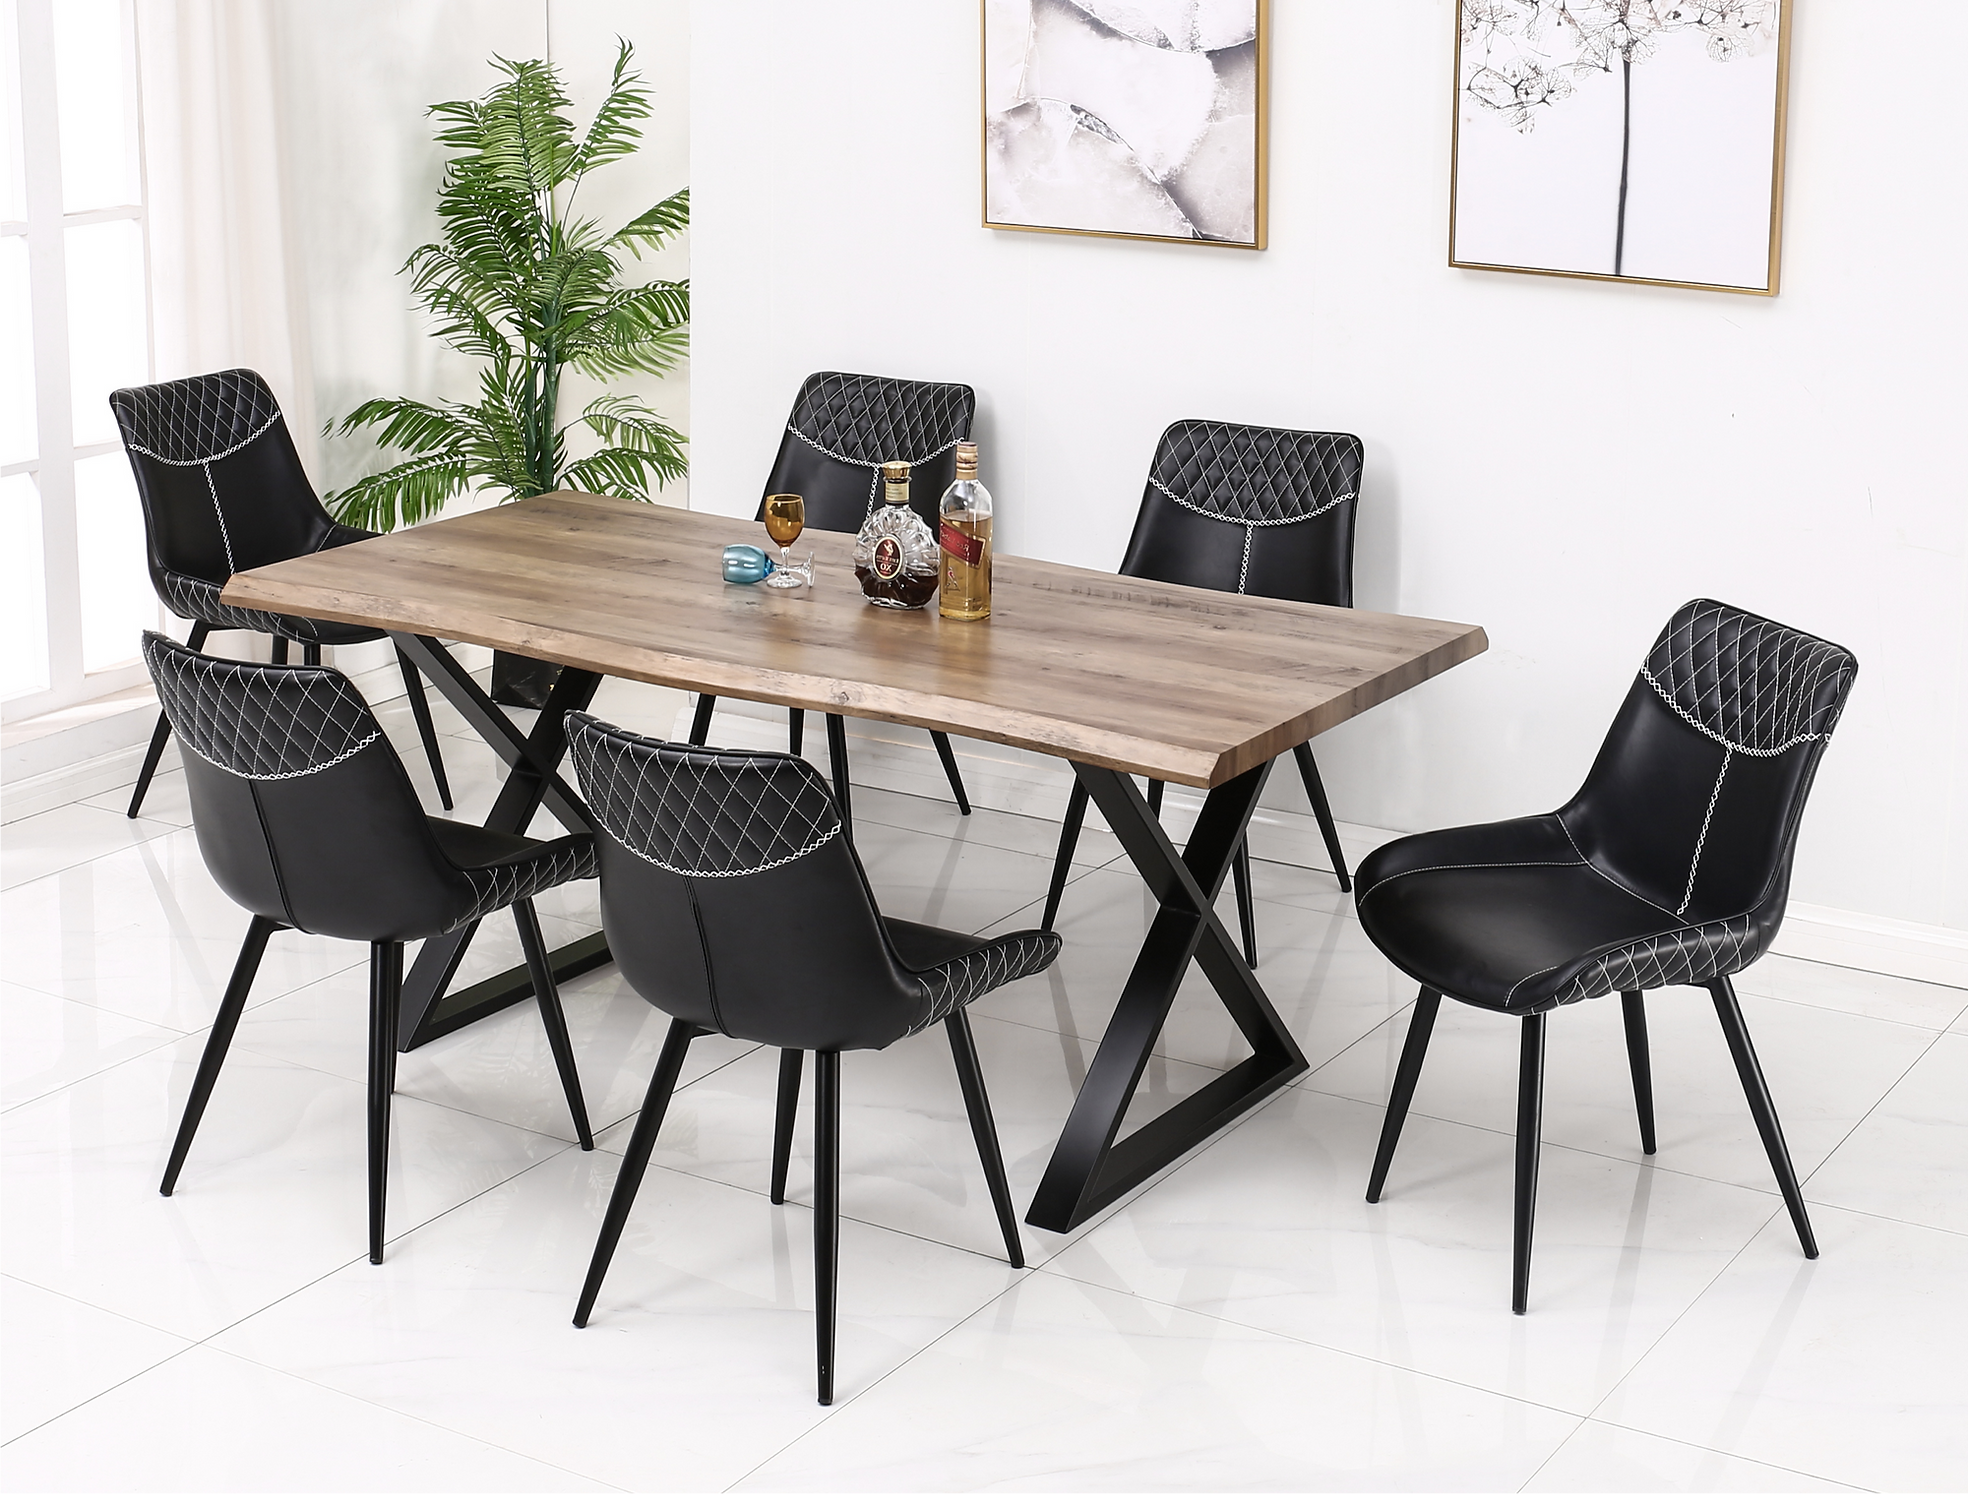 5Pc or 7Pc Dining Set - Live Edge Table with Black X Legs  T-1811 | C-1826